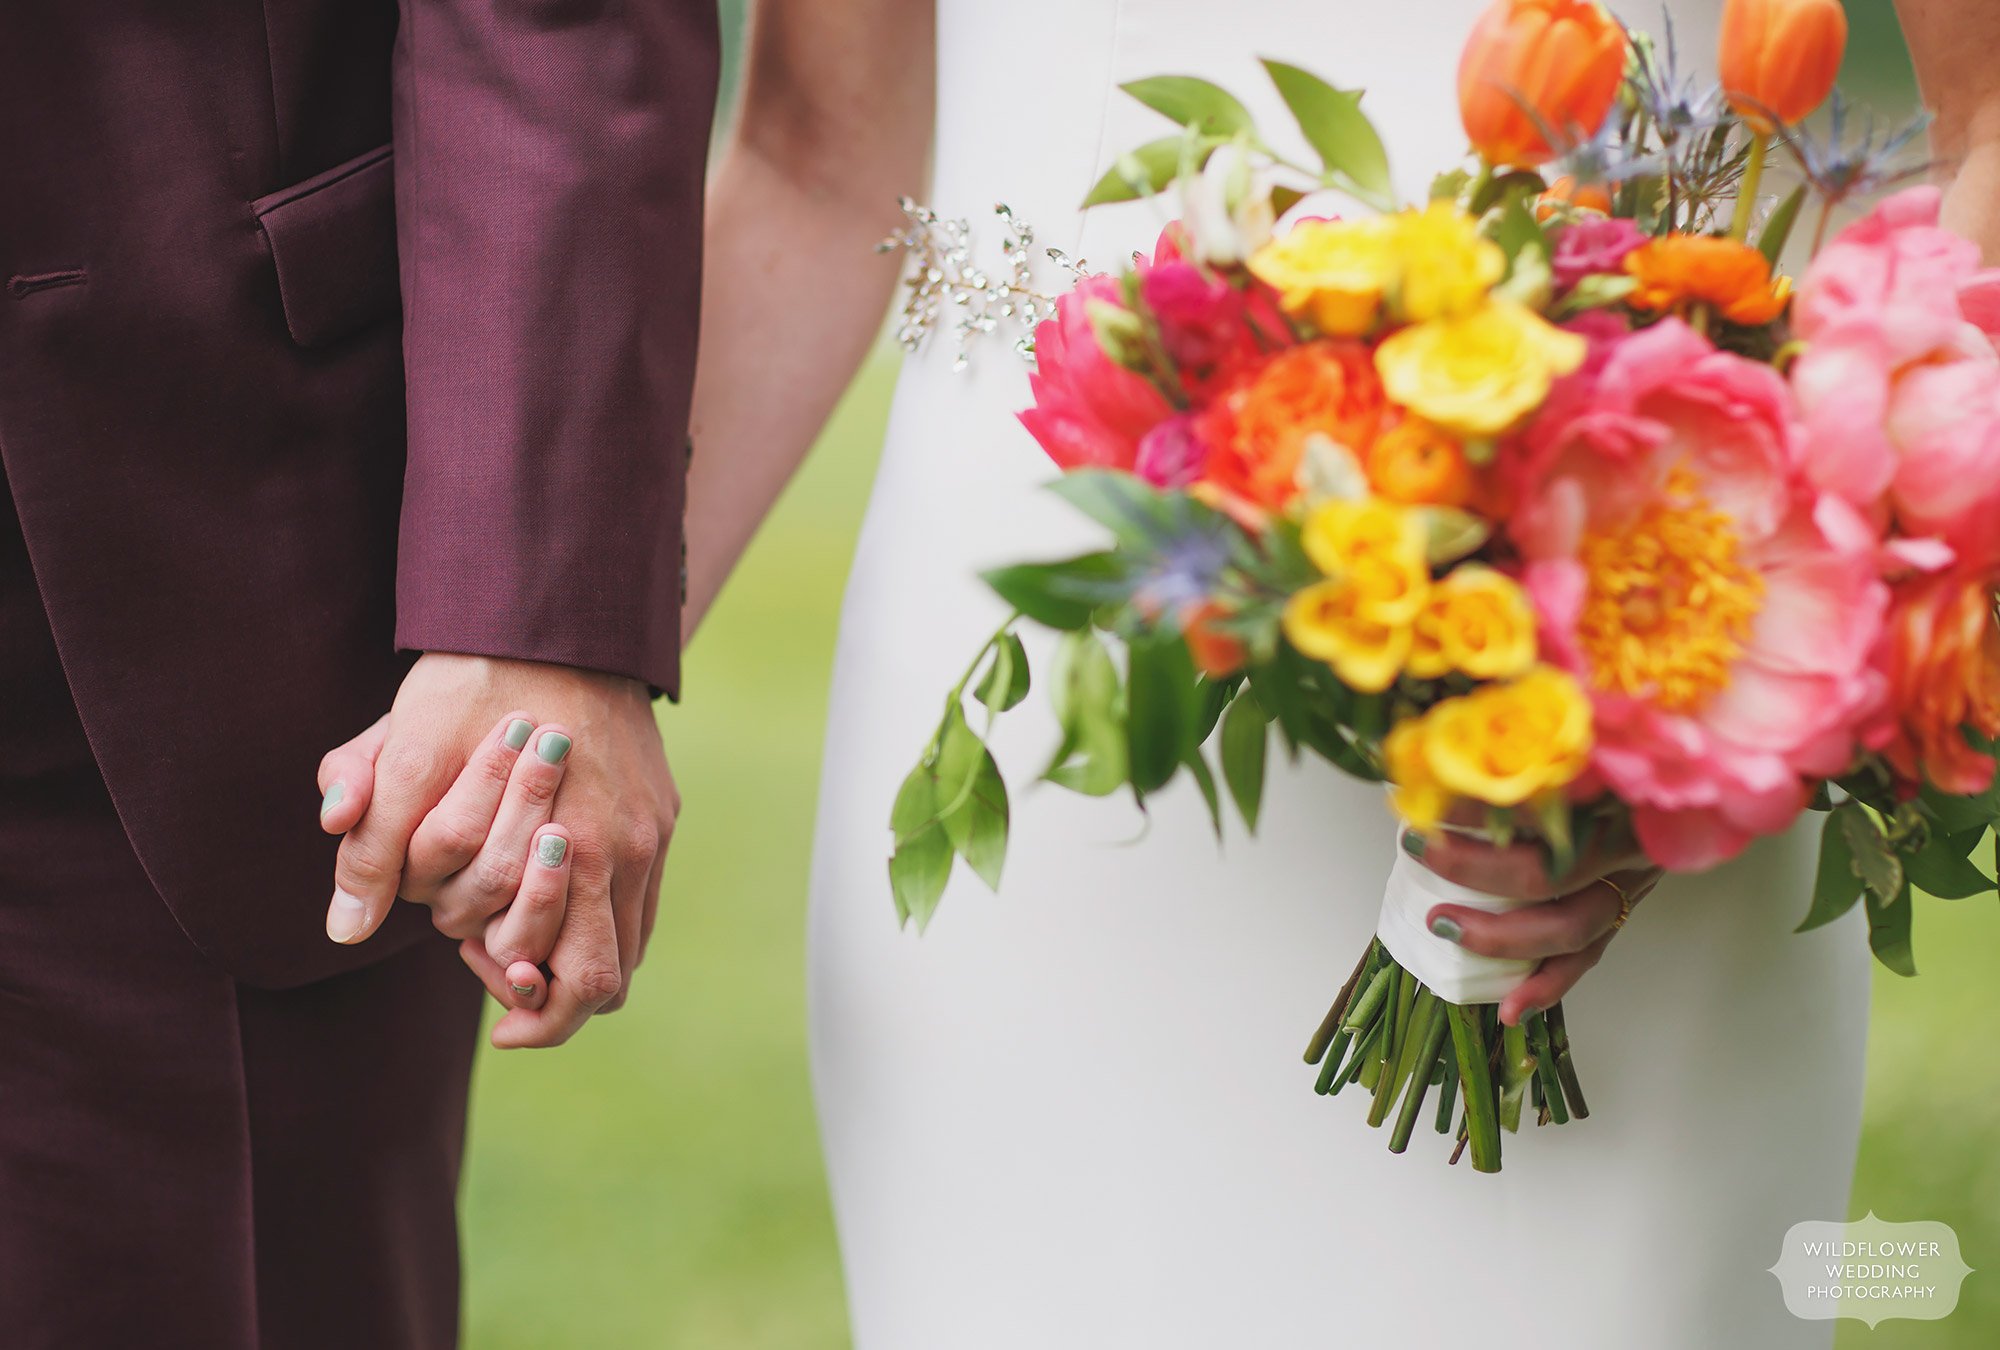 Bride and groom hold hands with blue nail polish and colorful wedding bouquet.